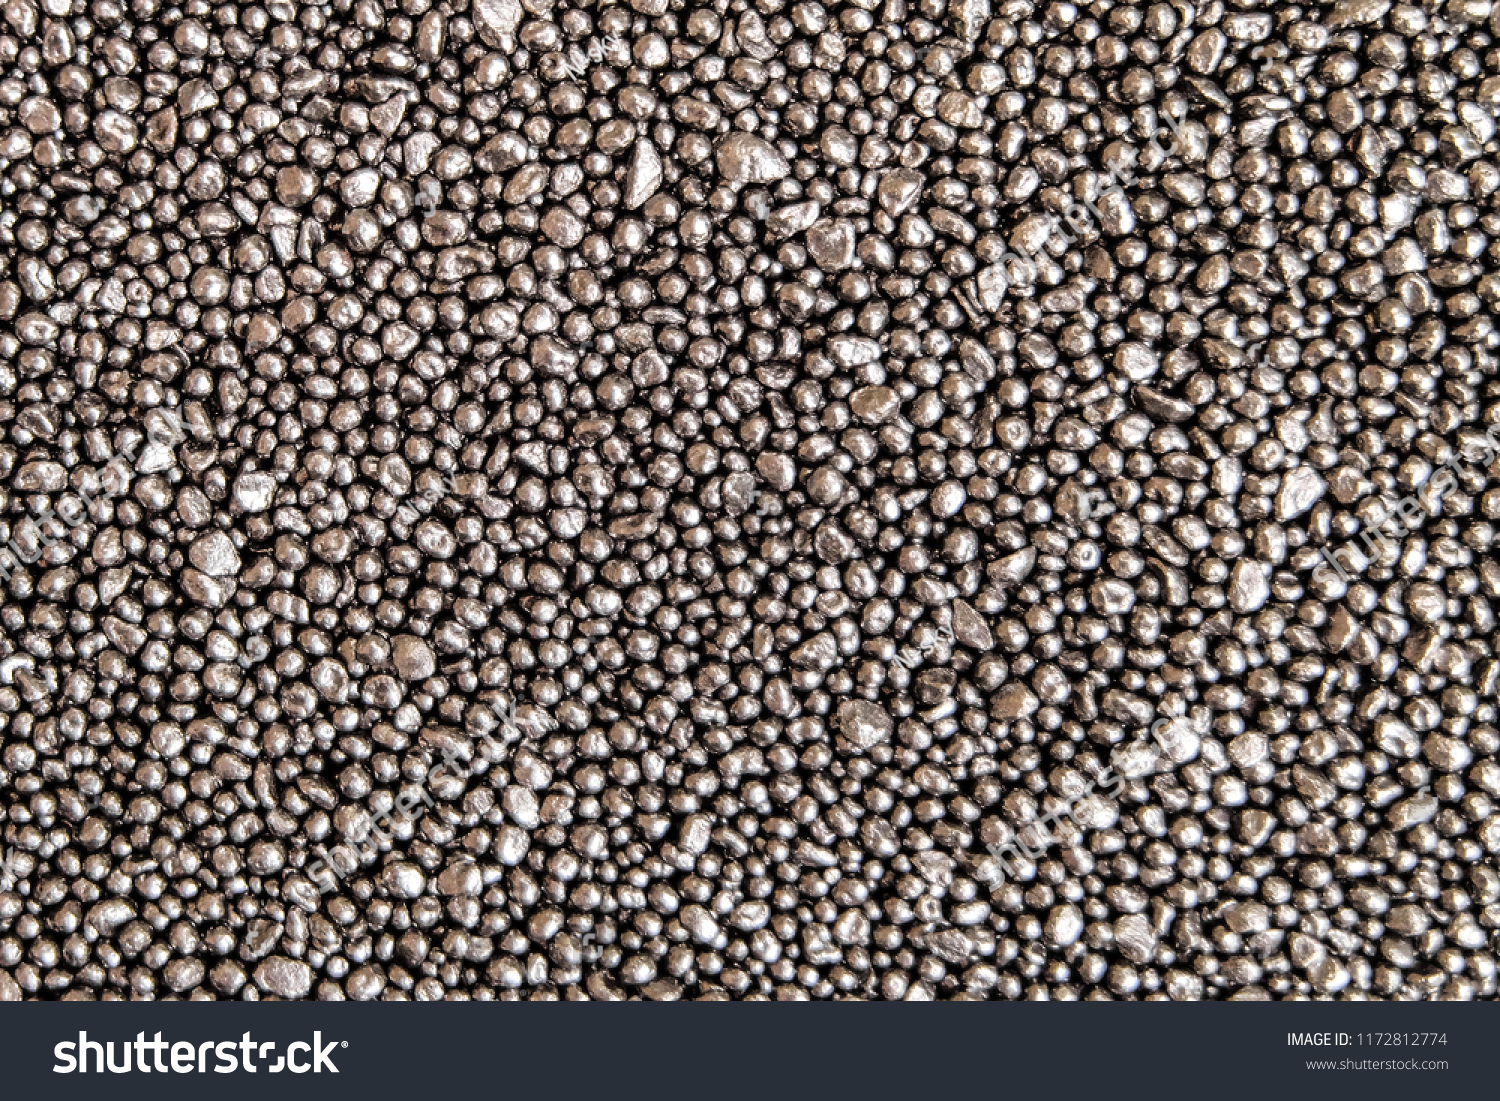 Steel shot for blasting machine. Abstract background of small metal balls. #1172812774